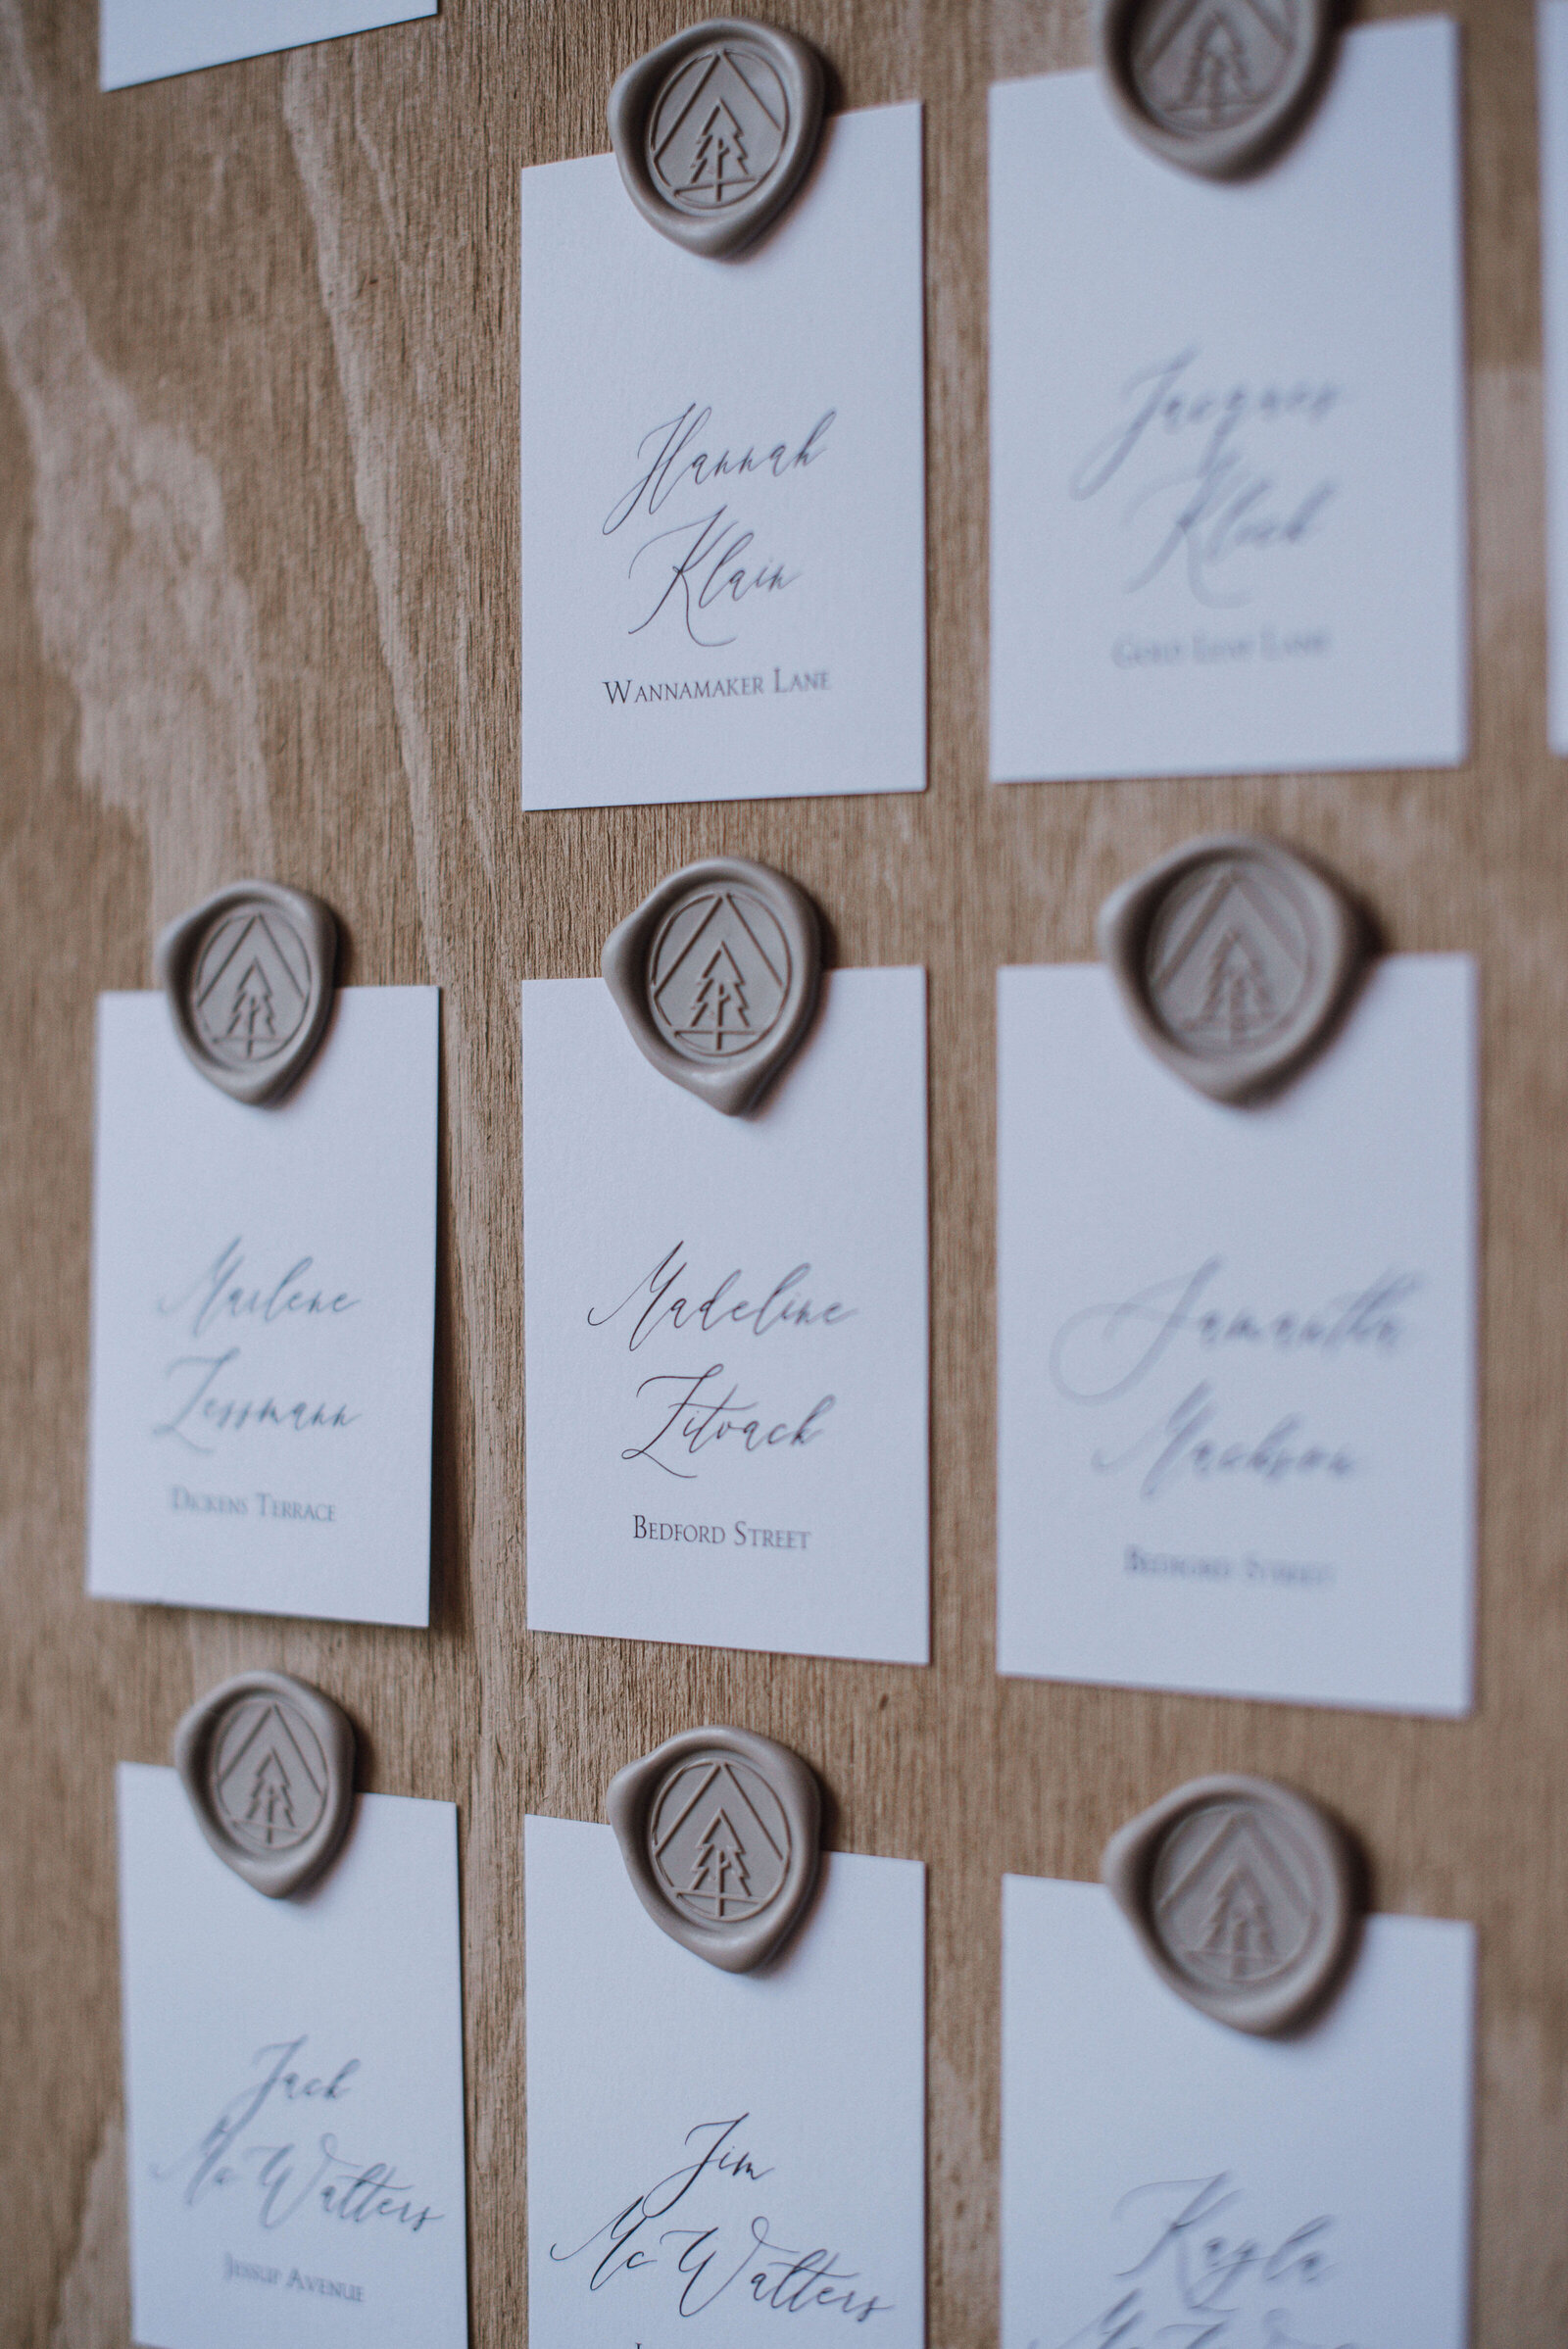 A wedding seating chart with wax seals of trees and mountains